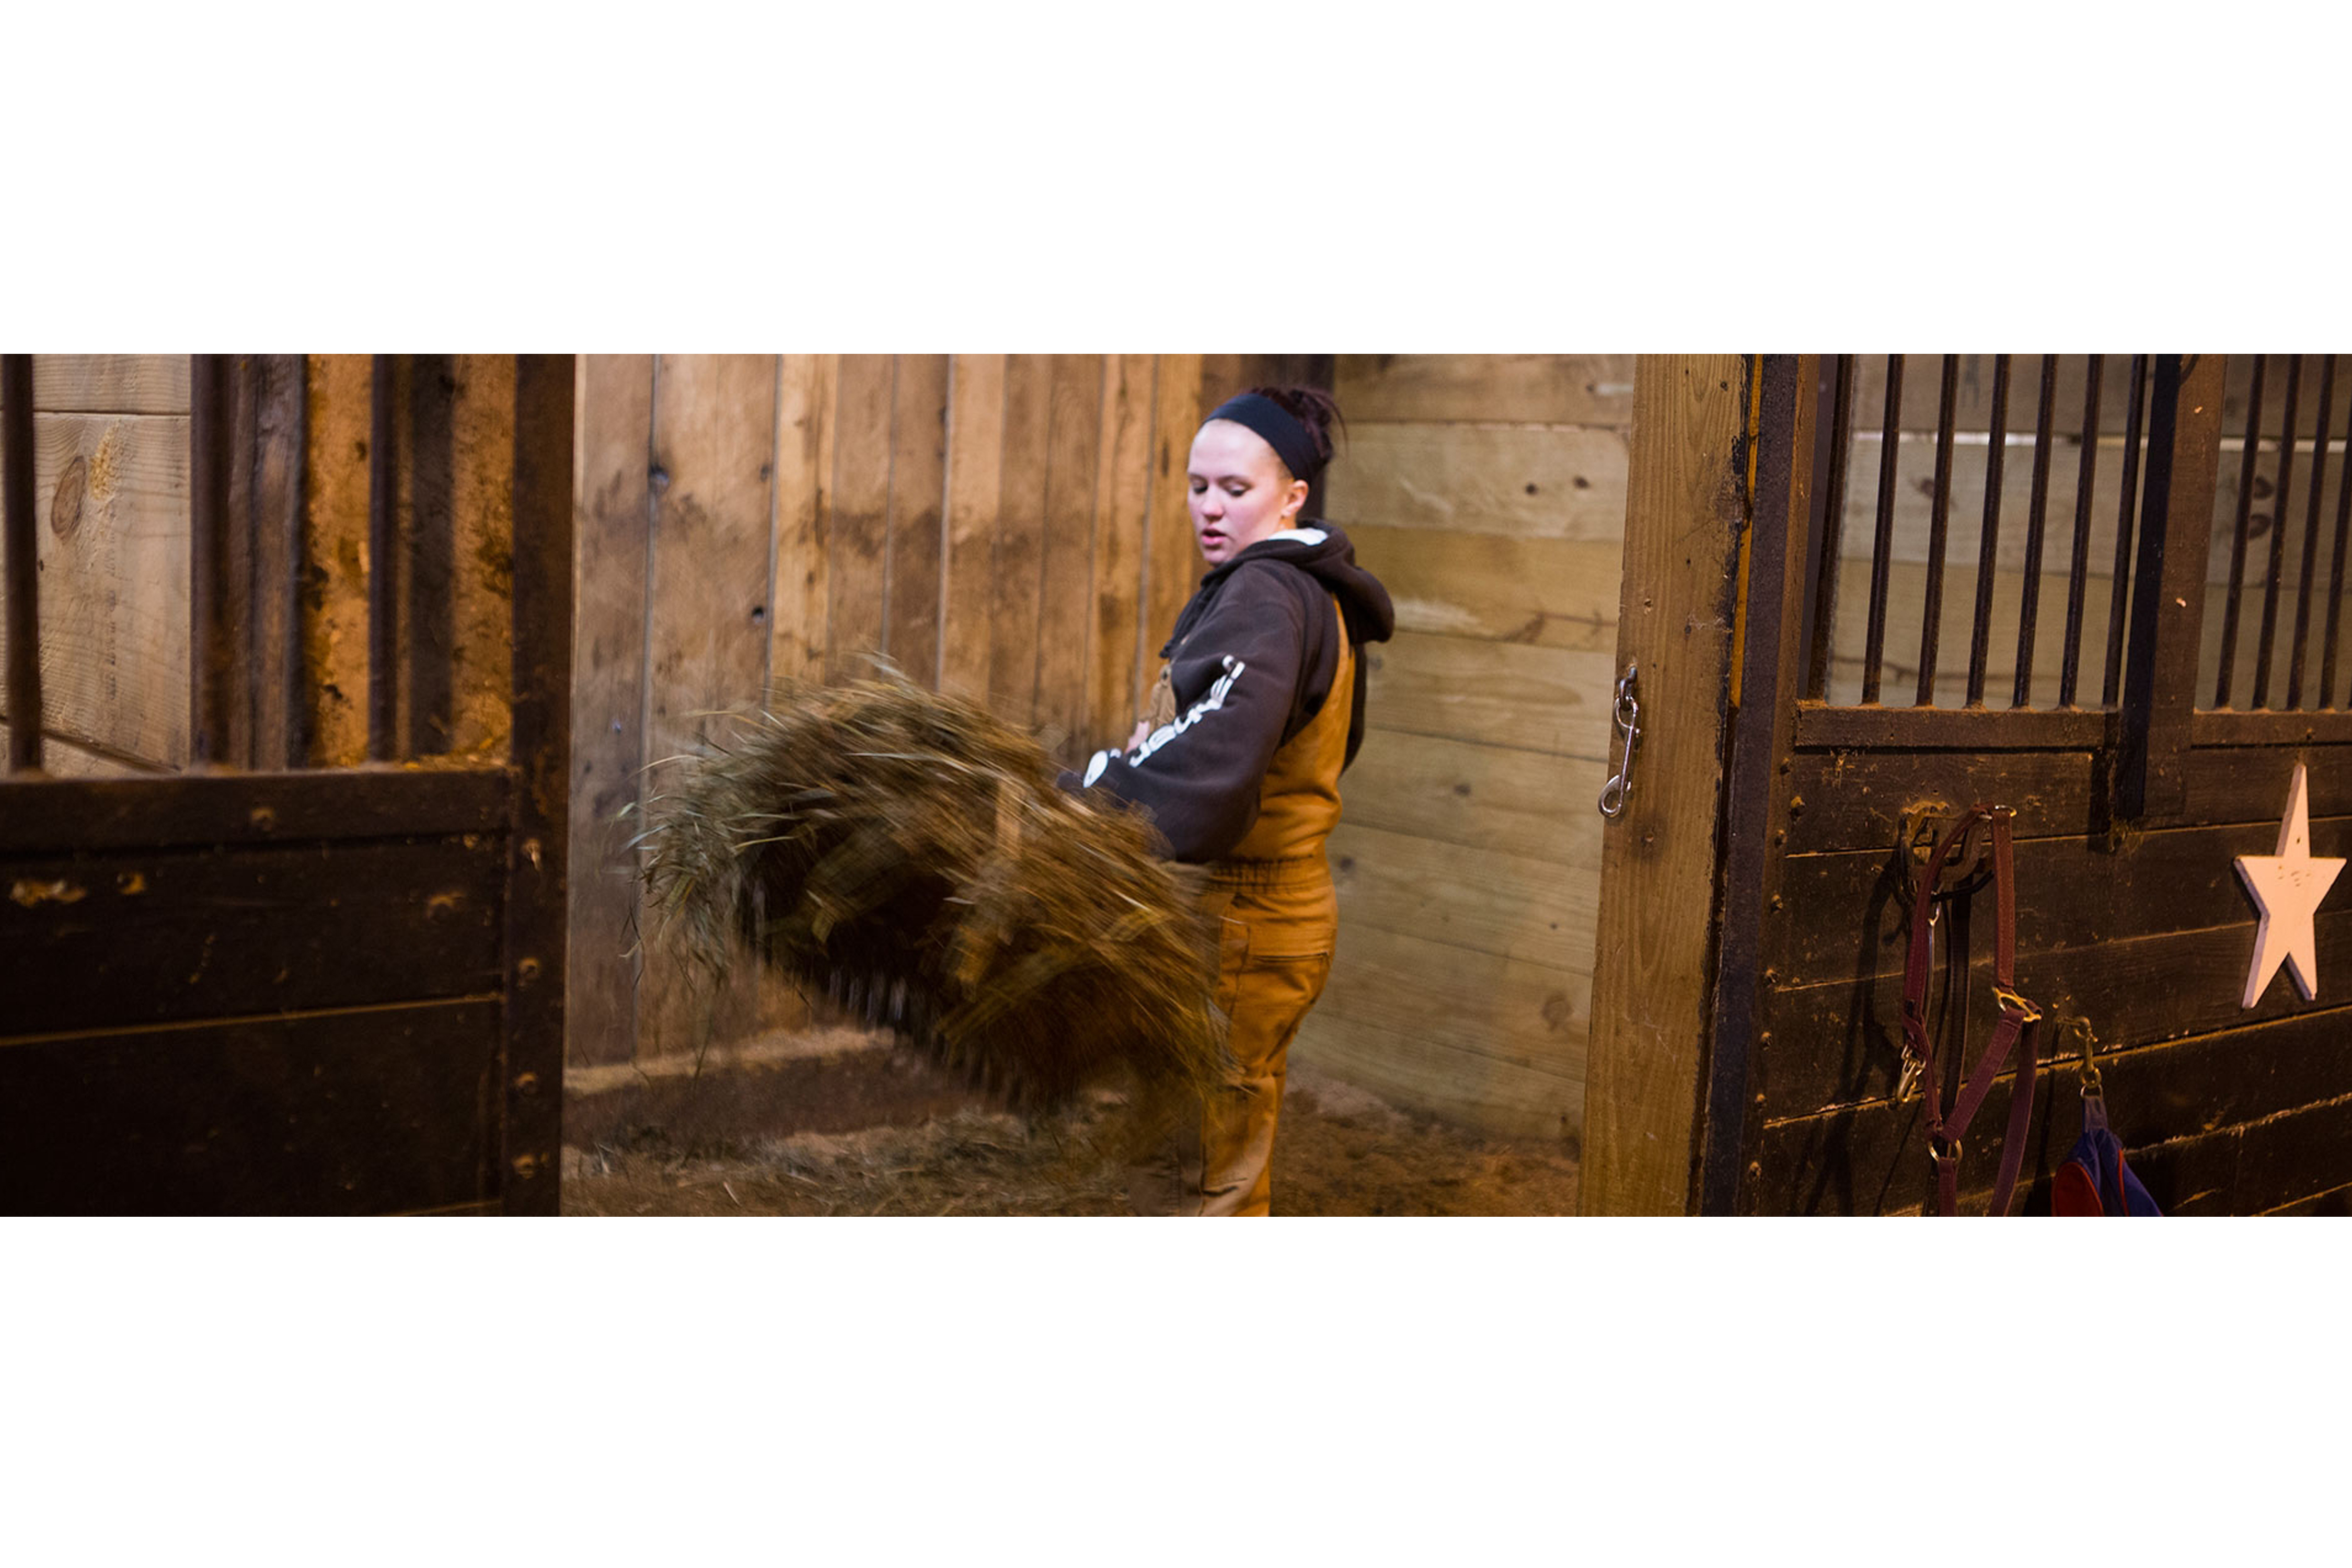  girl carrying straw